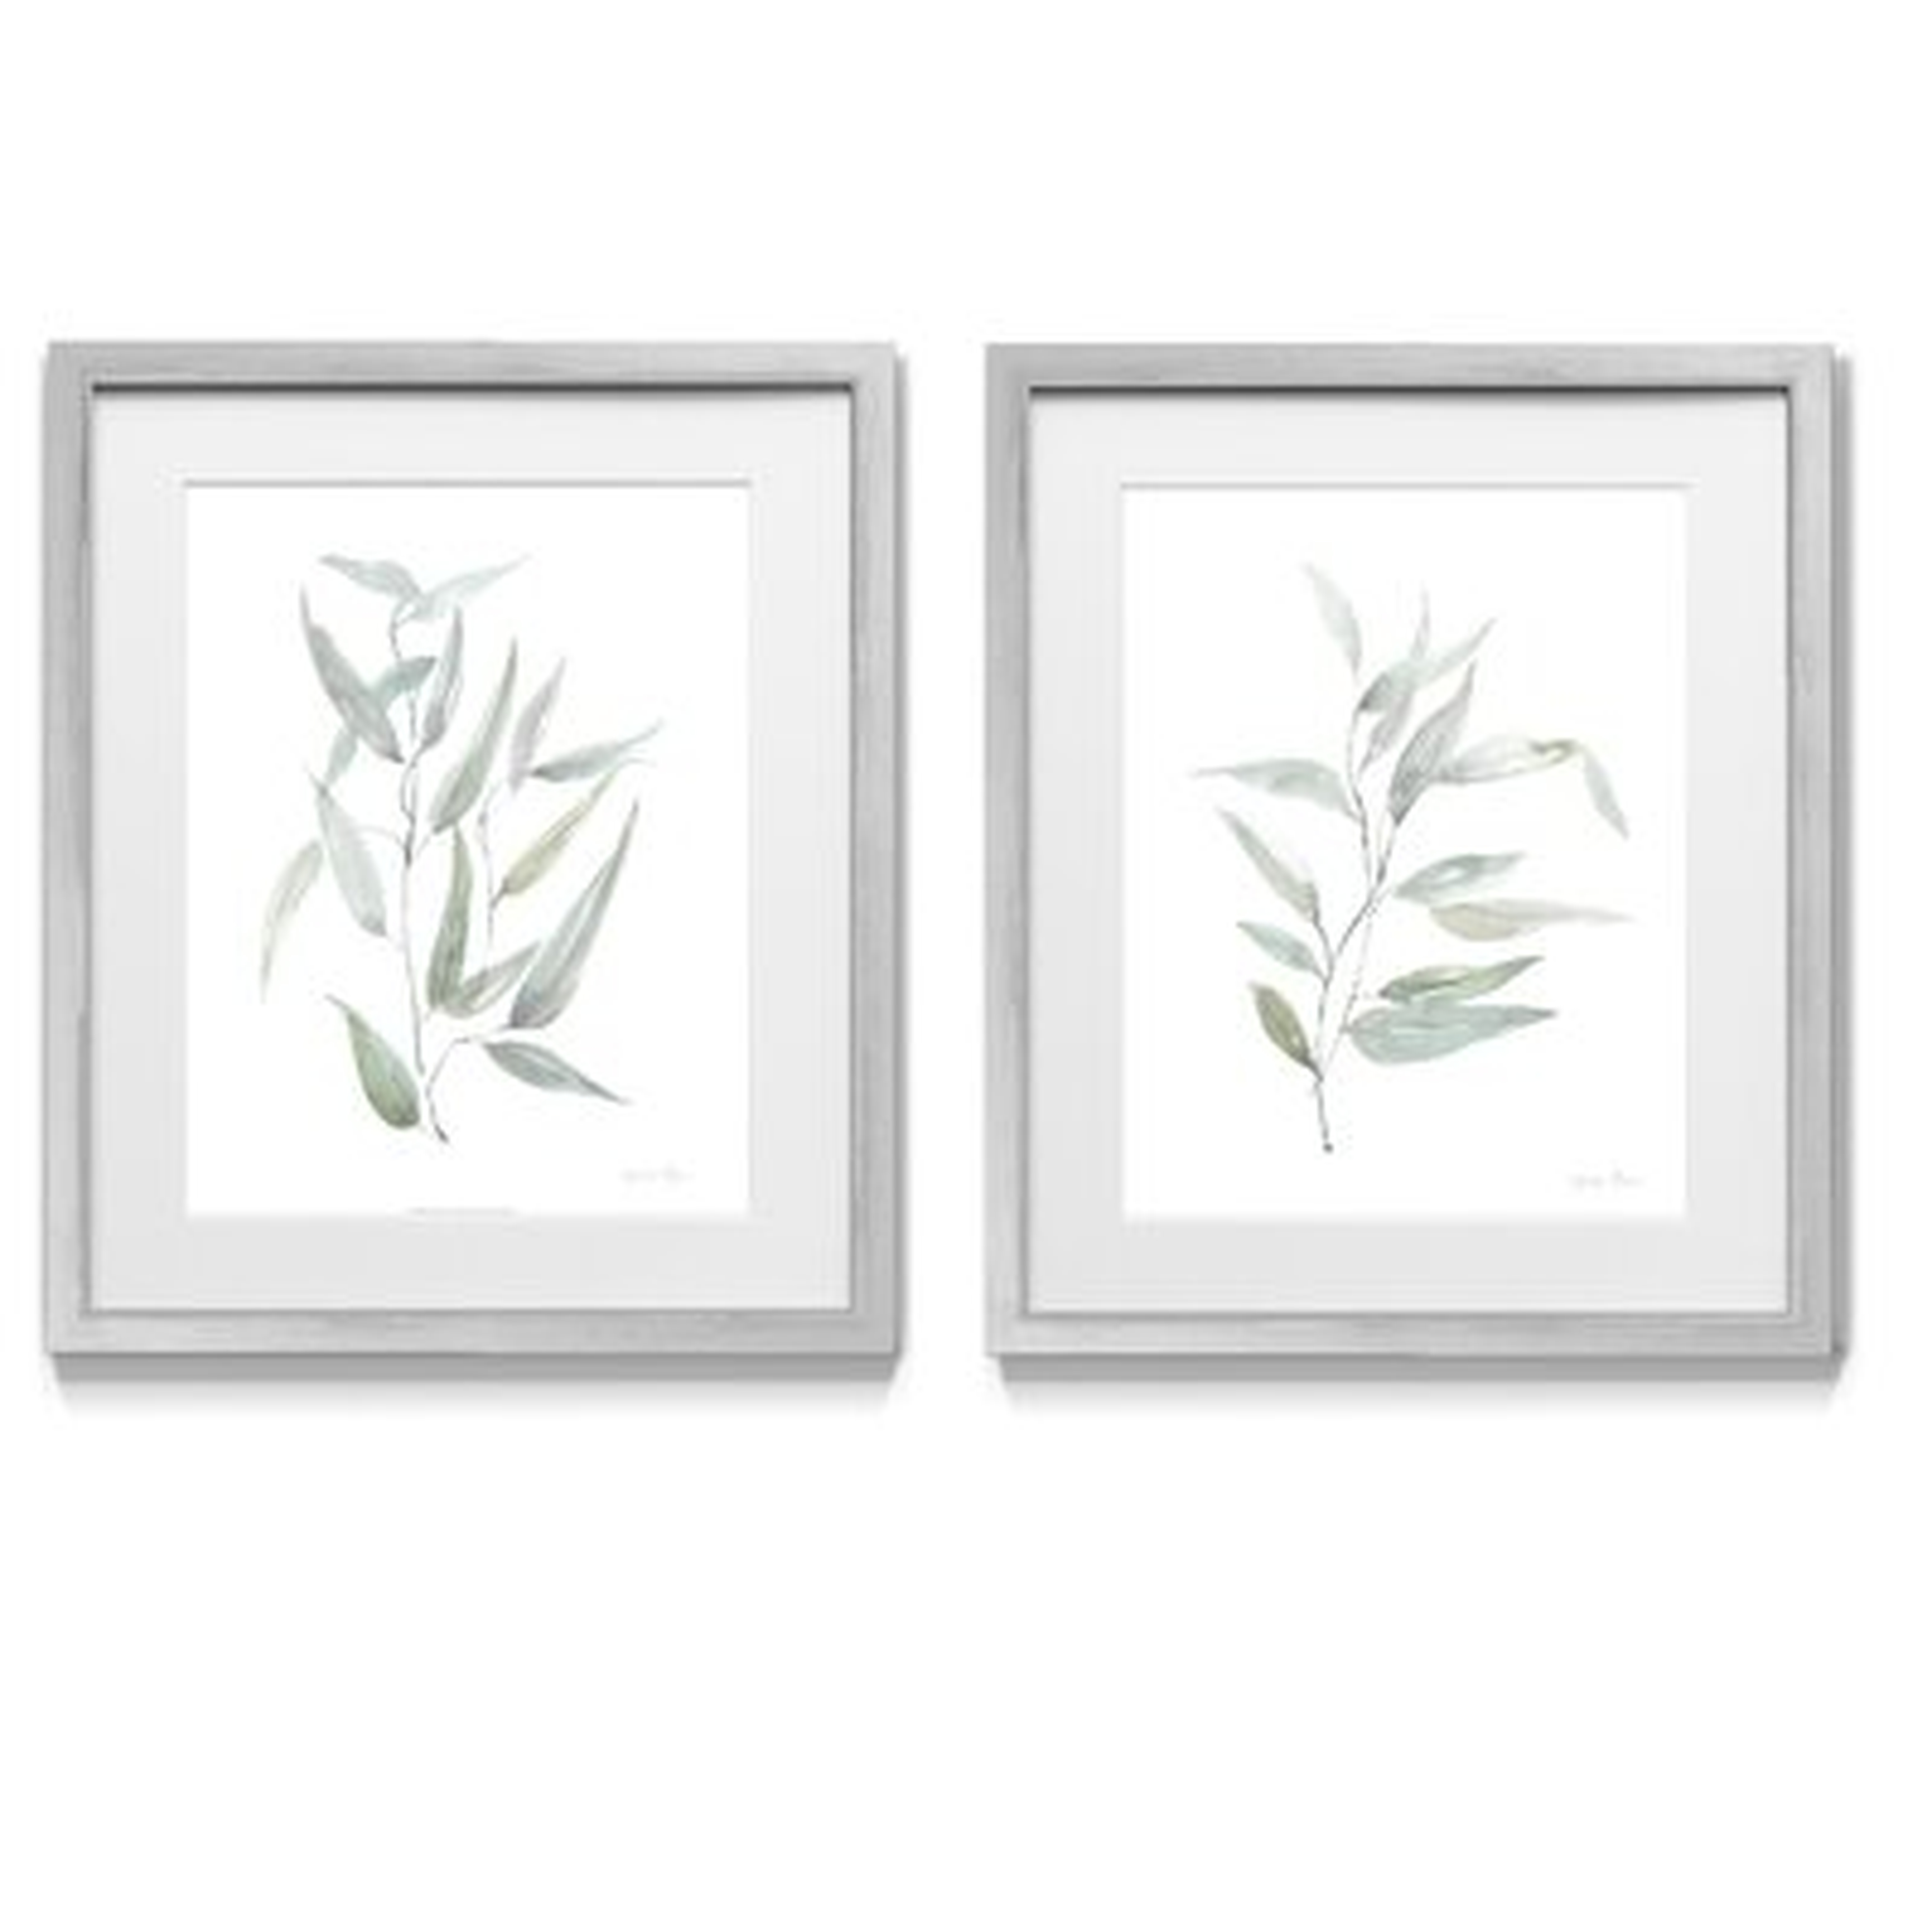 Ethereal Eucalyptus I, Picture Frame Graphic Art, Set of 2 - Wayfair